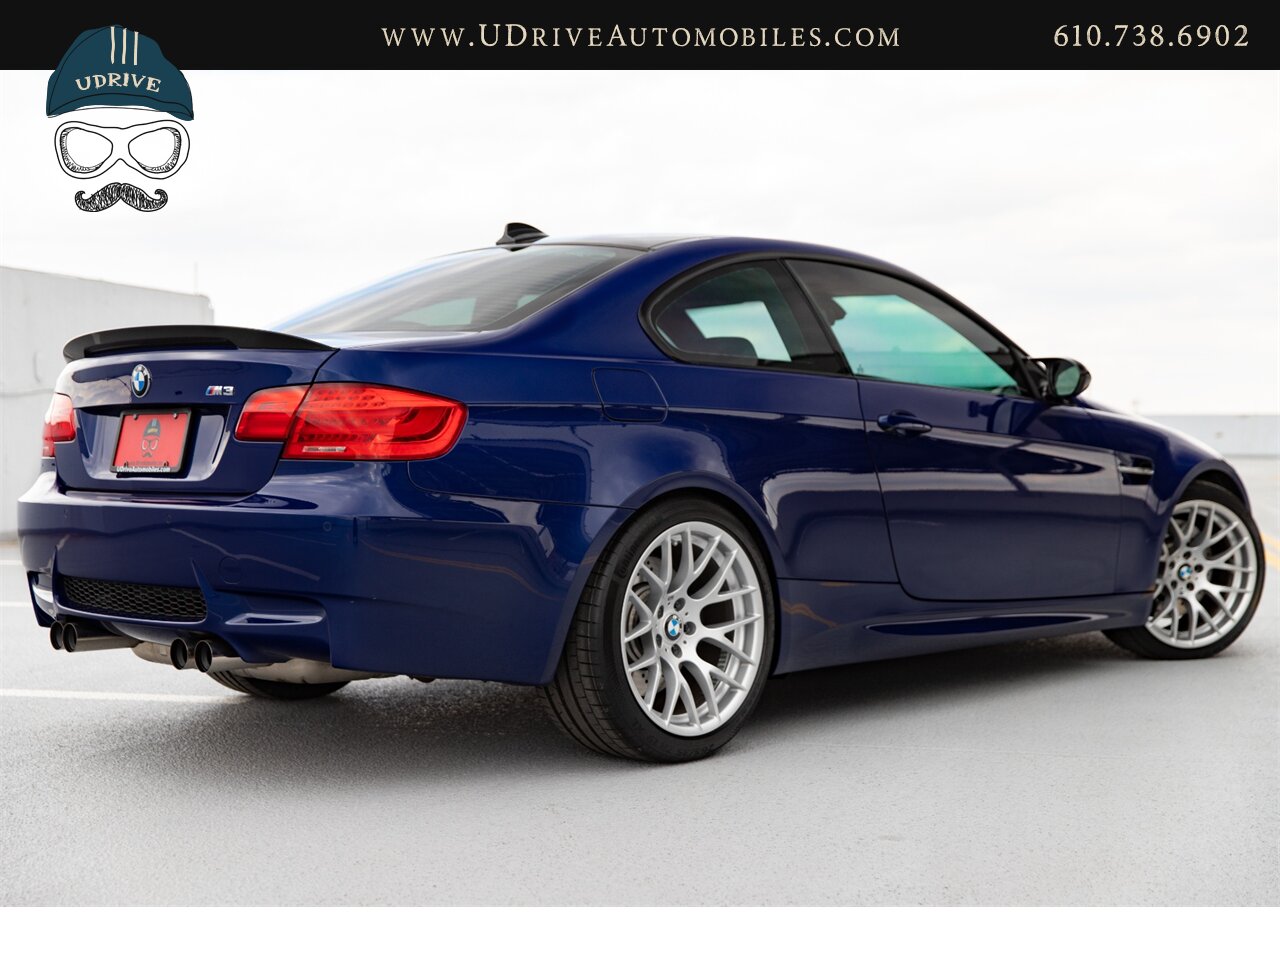 2011 BMW M3 E92 6 Speed Manual Competition Pkg Interlagos Blue  16k Miles Nav PDC EDC Comf Acc - Photo 4 - West Chester, PA 19382